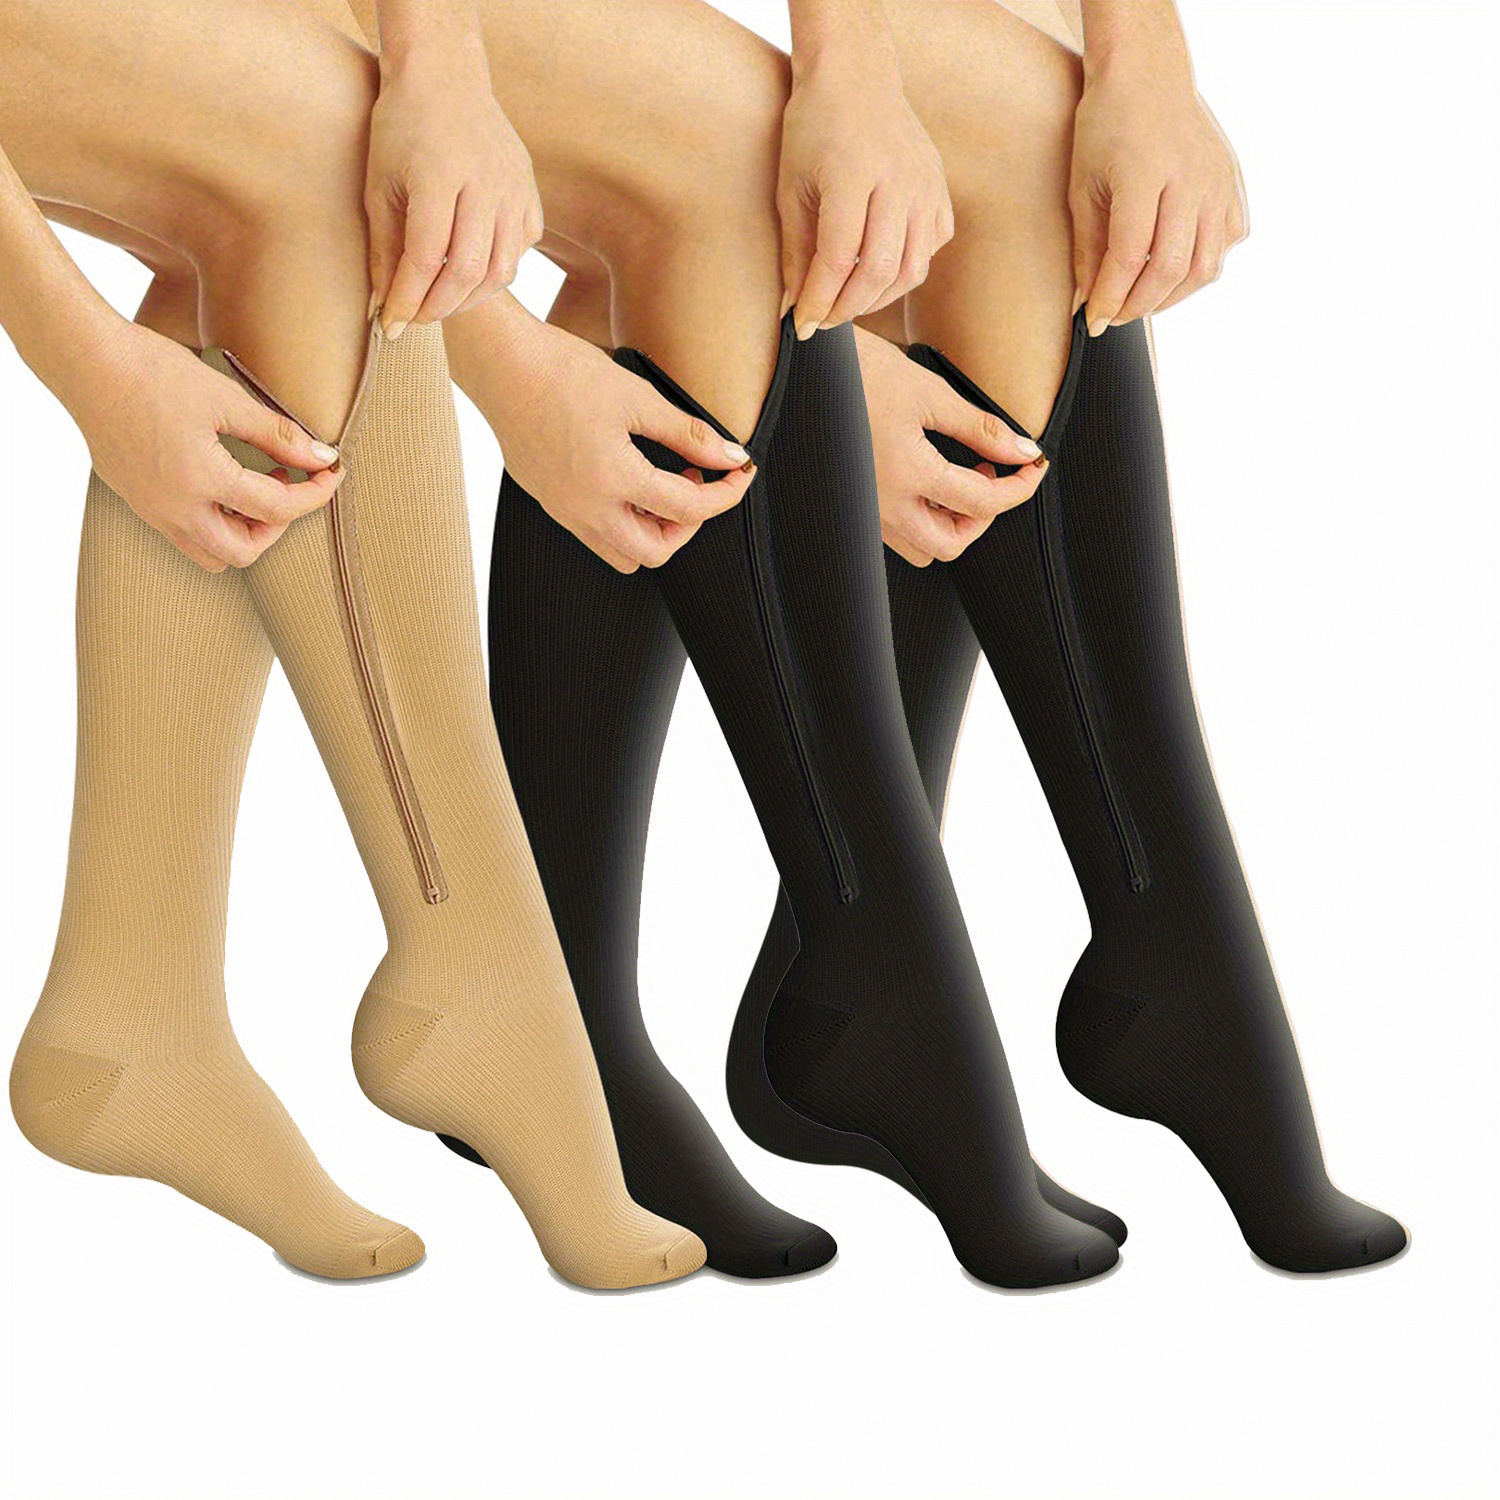 Zippered Compression Socks Closed Toe 20-30mmHg with Zipper Safe